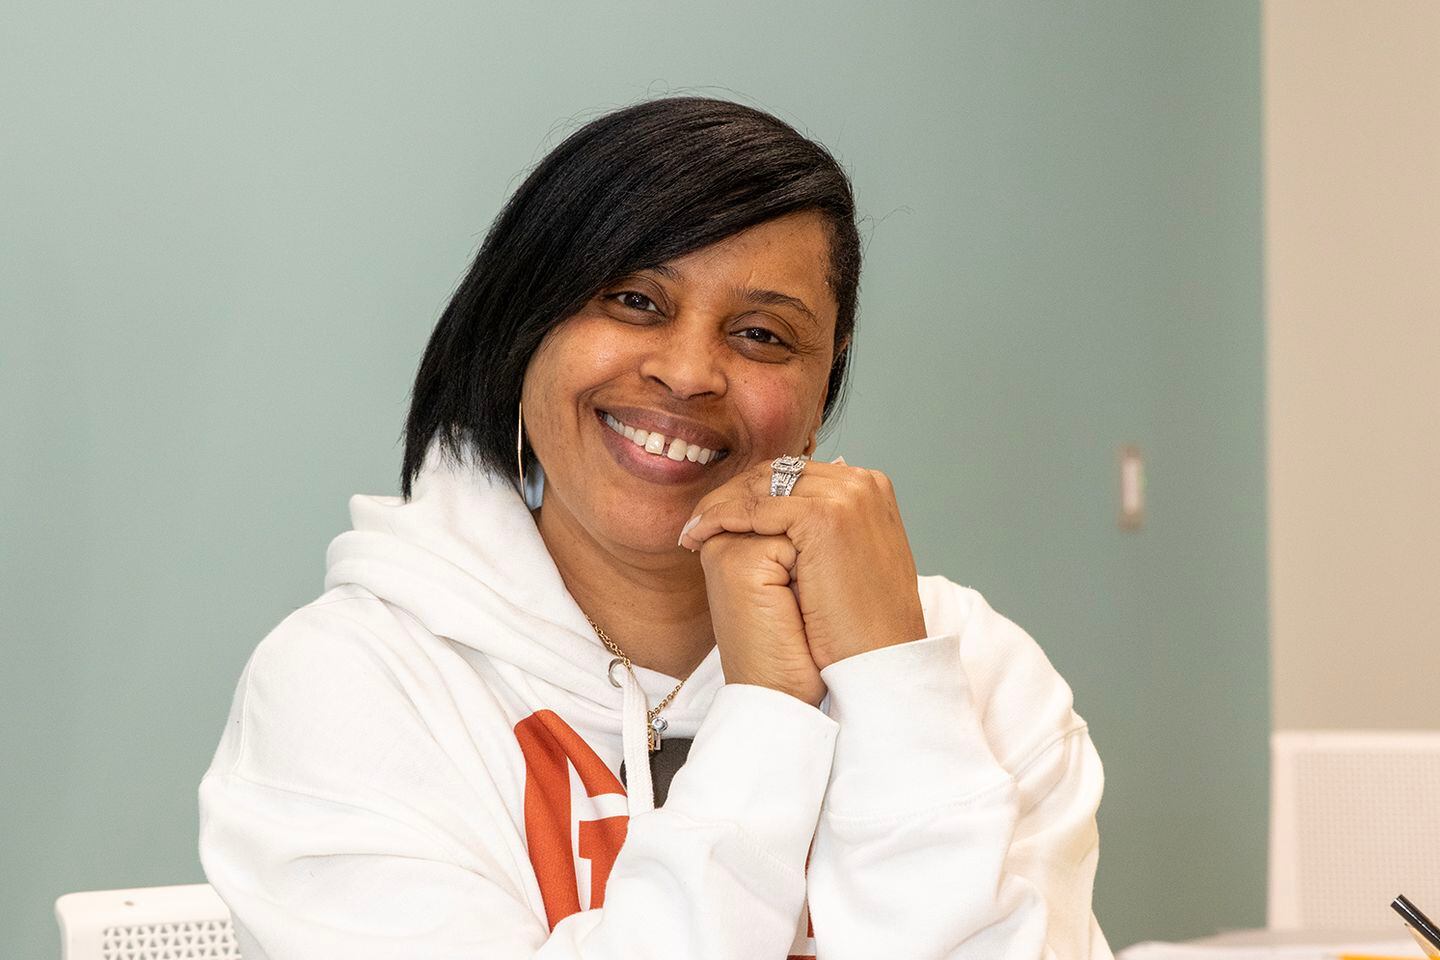 Clarice Williams, a reading specialist for Cincinnati Public Schools, tutors children staying at the city's main family shelter through Project Connect.